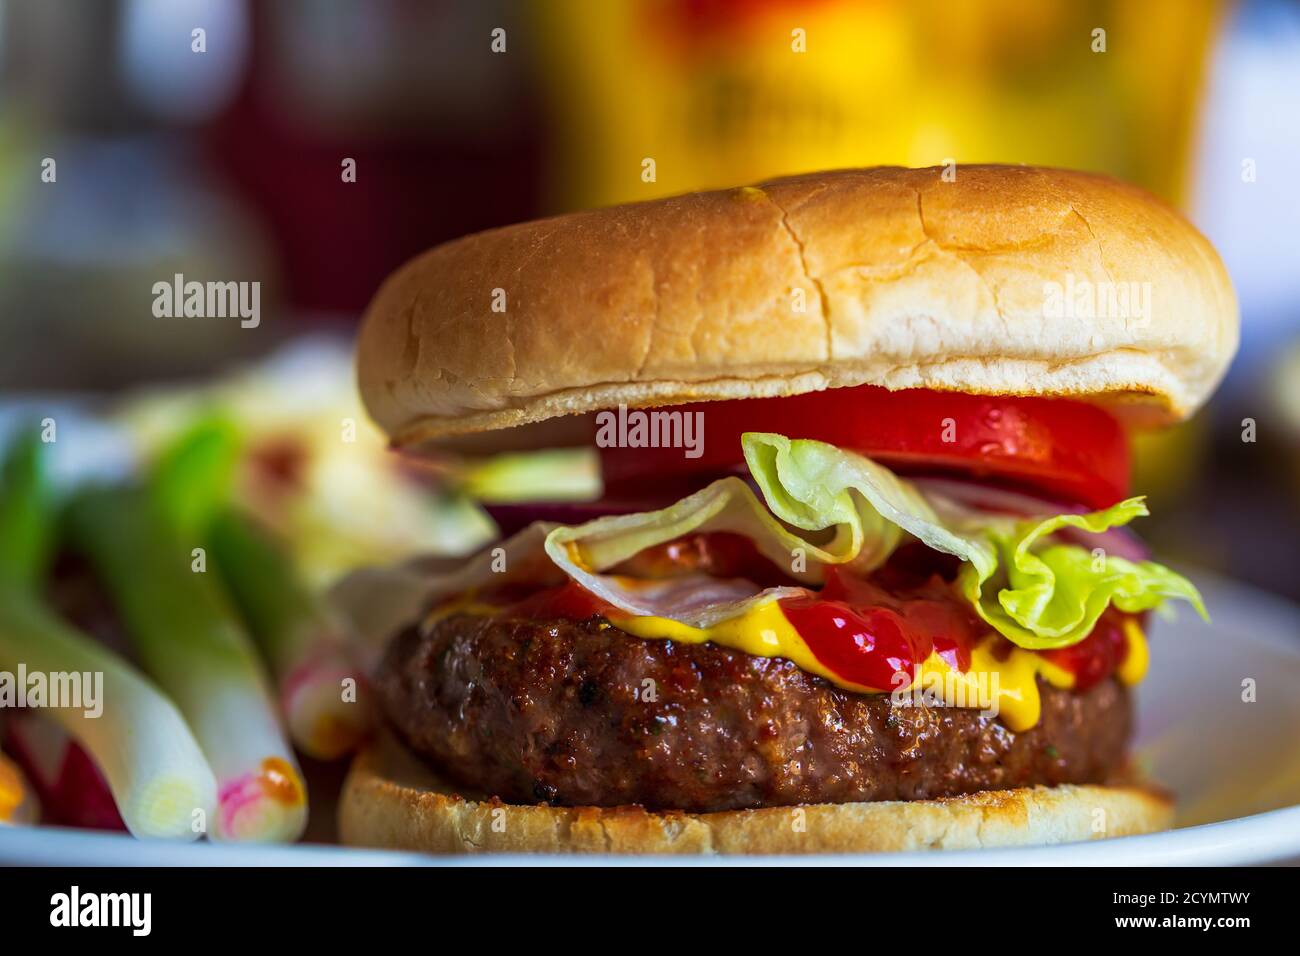 Fresh Juicy Beef Burger in a Toasted Bap Stock Photo